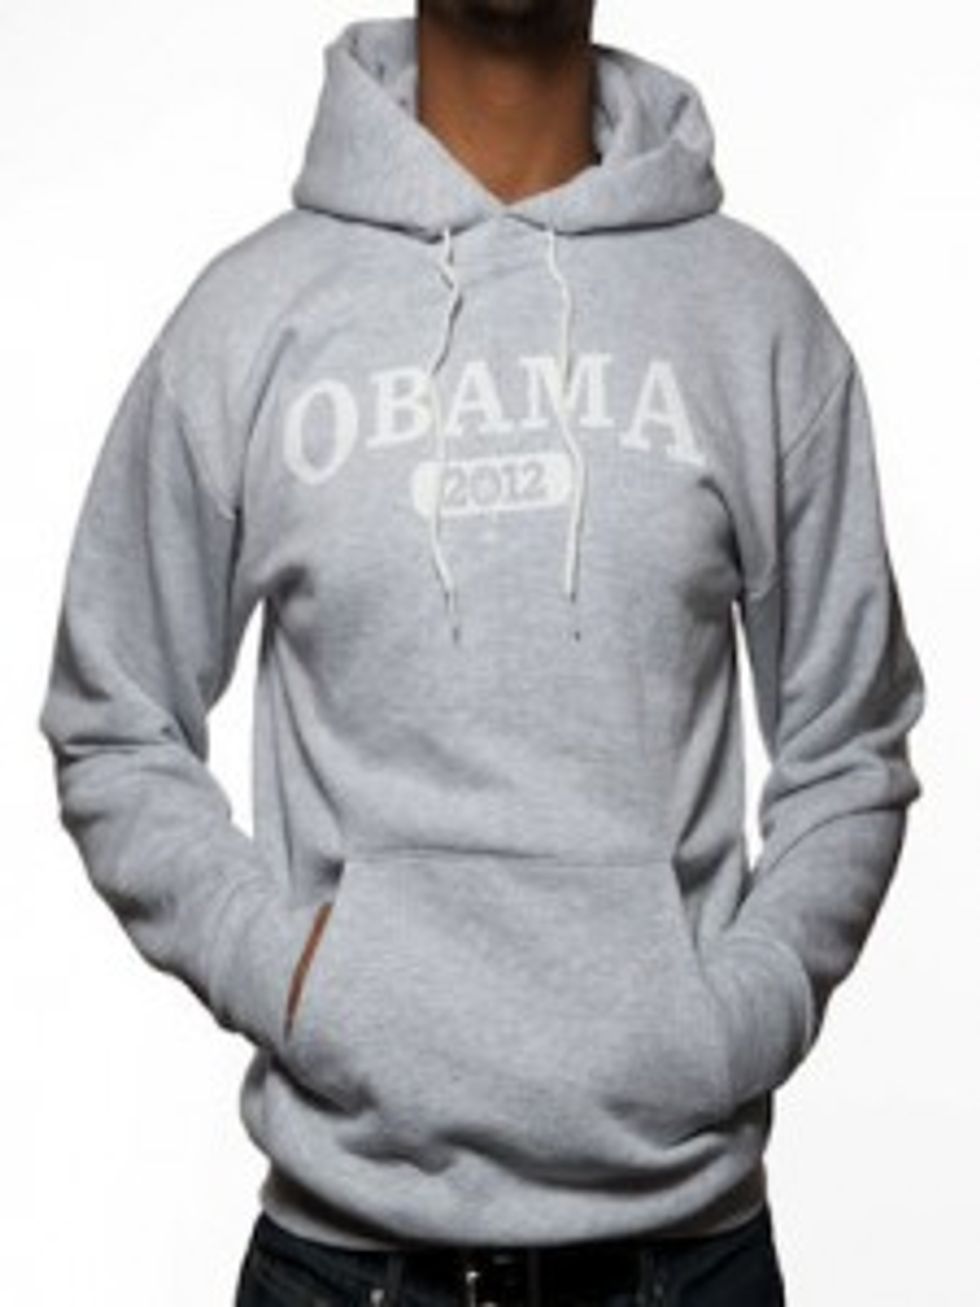 Stunning Victory For Furious Wingnuts: Obama Camp No Longer Cutting $10 Off Sweatshirts With Hoods